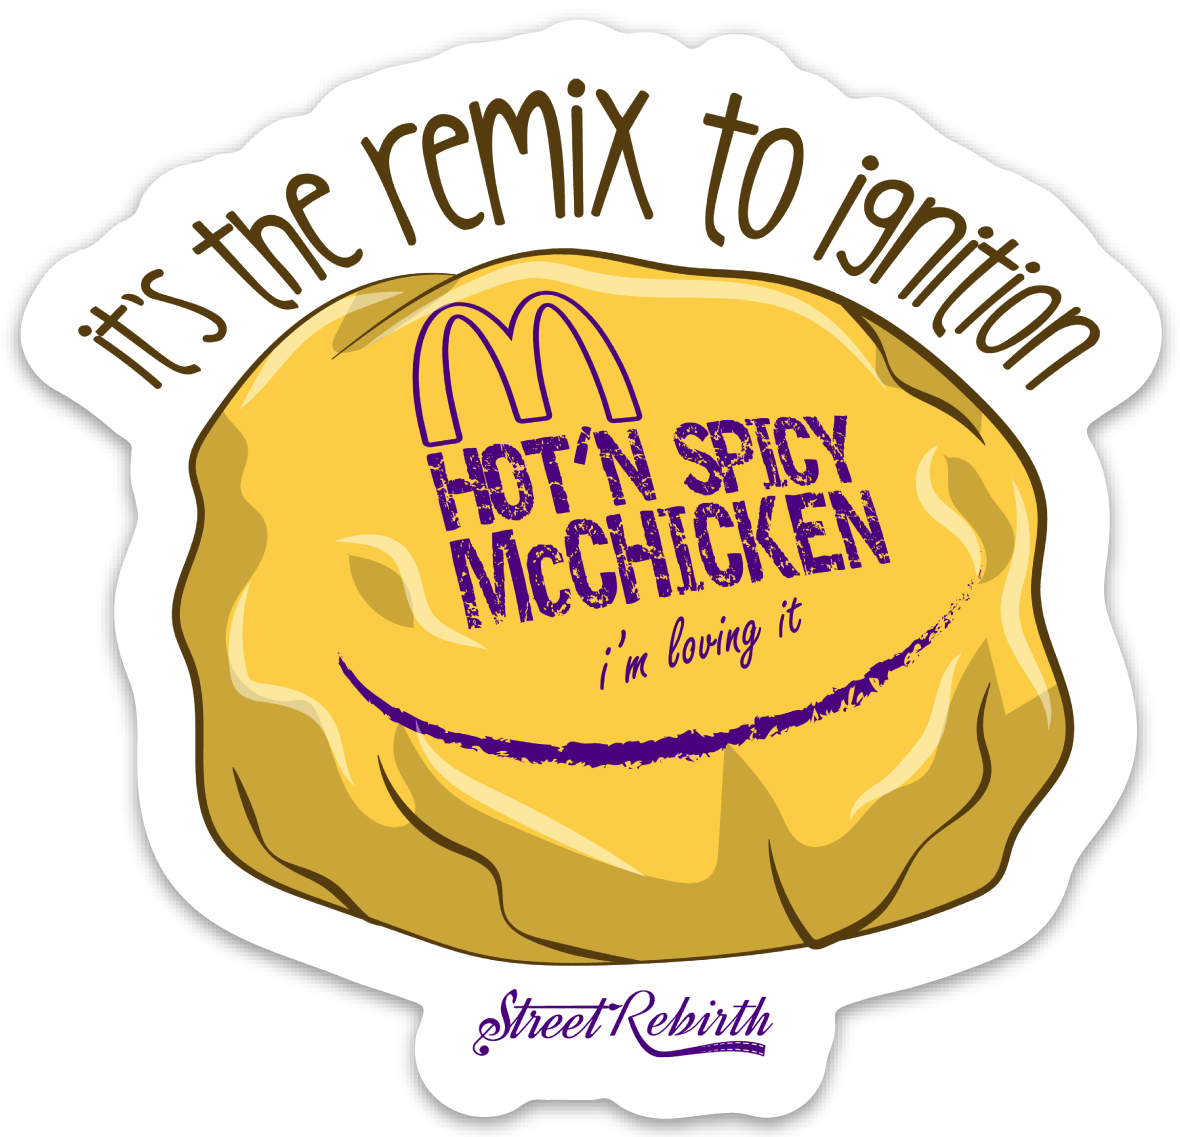 HOT'N SPICY McChicken PUN STICKER – ONE 4 INCH WATER PROOF VINYL STICKER – FOR HYDRO FLASK, SKATEBOARD, LAPTOP, PLANNER, CAR, COLLECTING, GIFTING